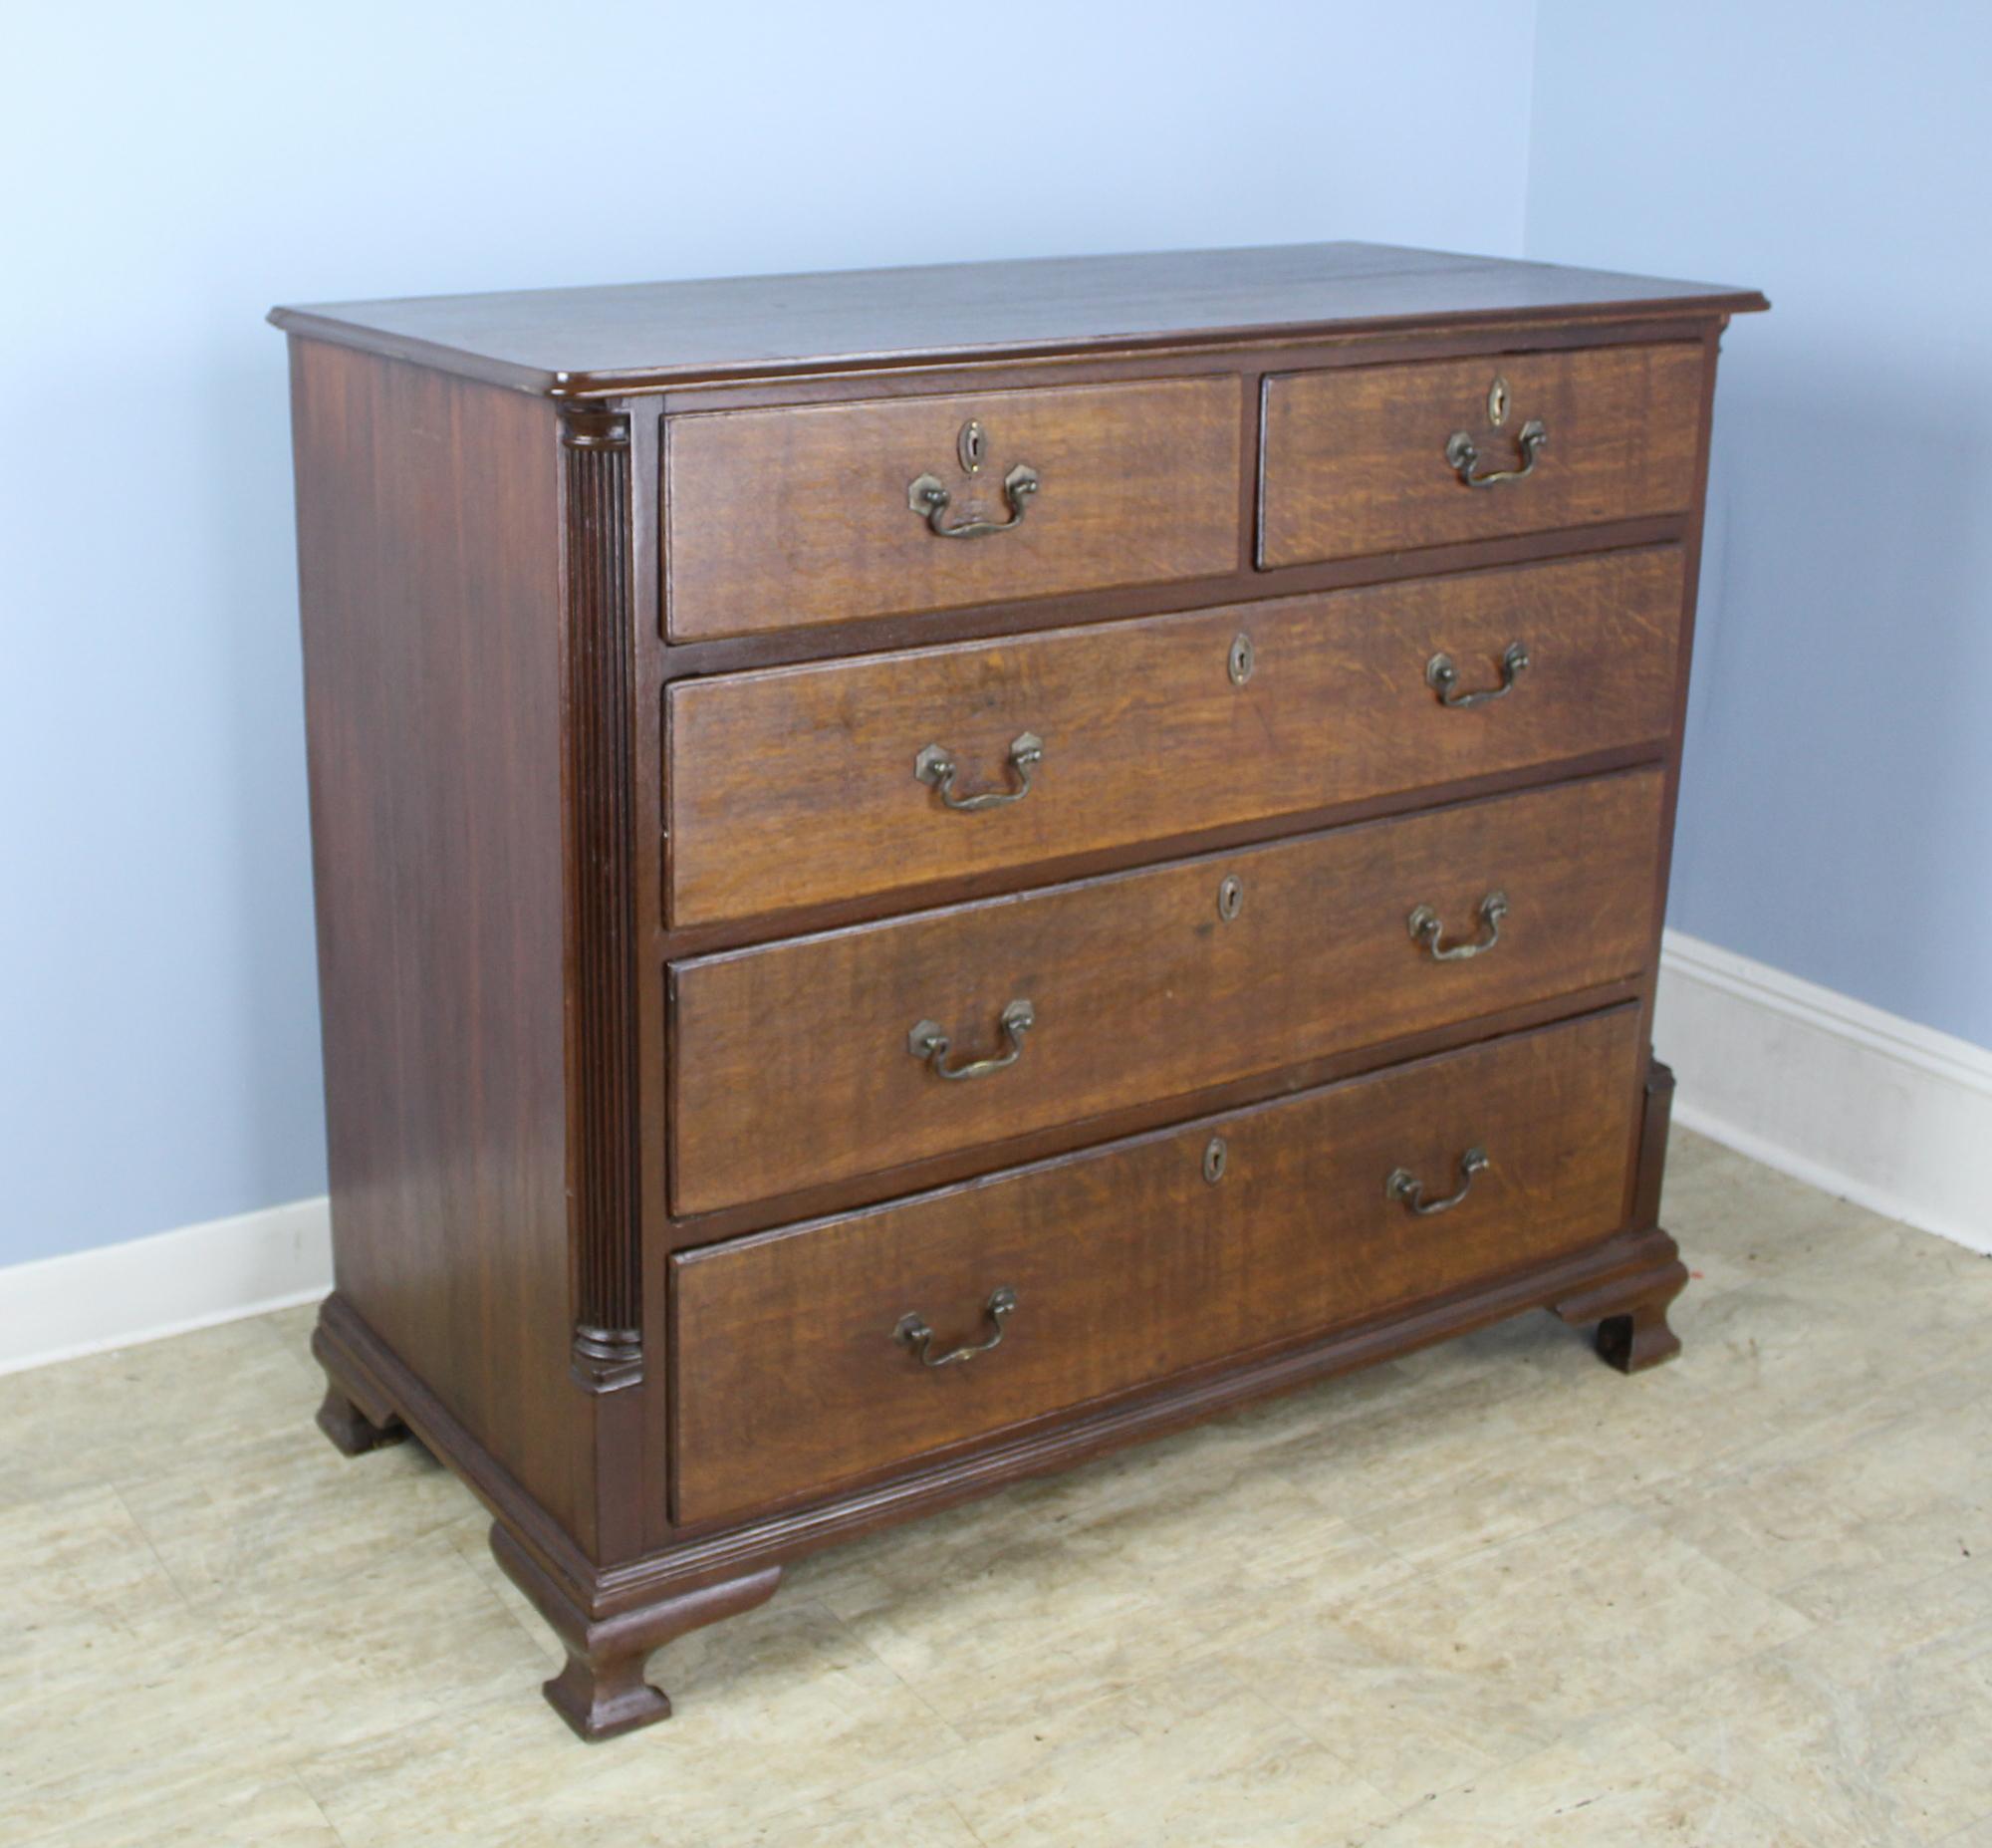 An early English chest of drawers with original handles and stylized ogee feet. Classic two-over-three construction and generously proportioned. Note the fine reeded quarter-columns.